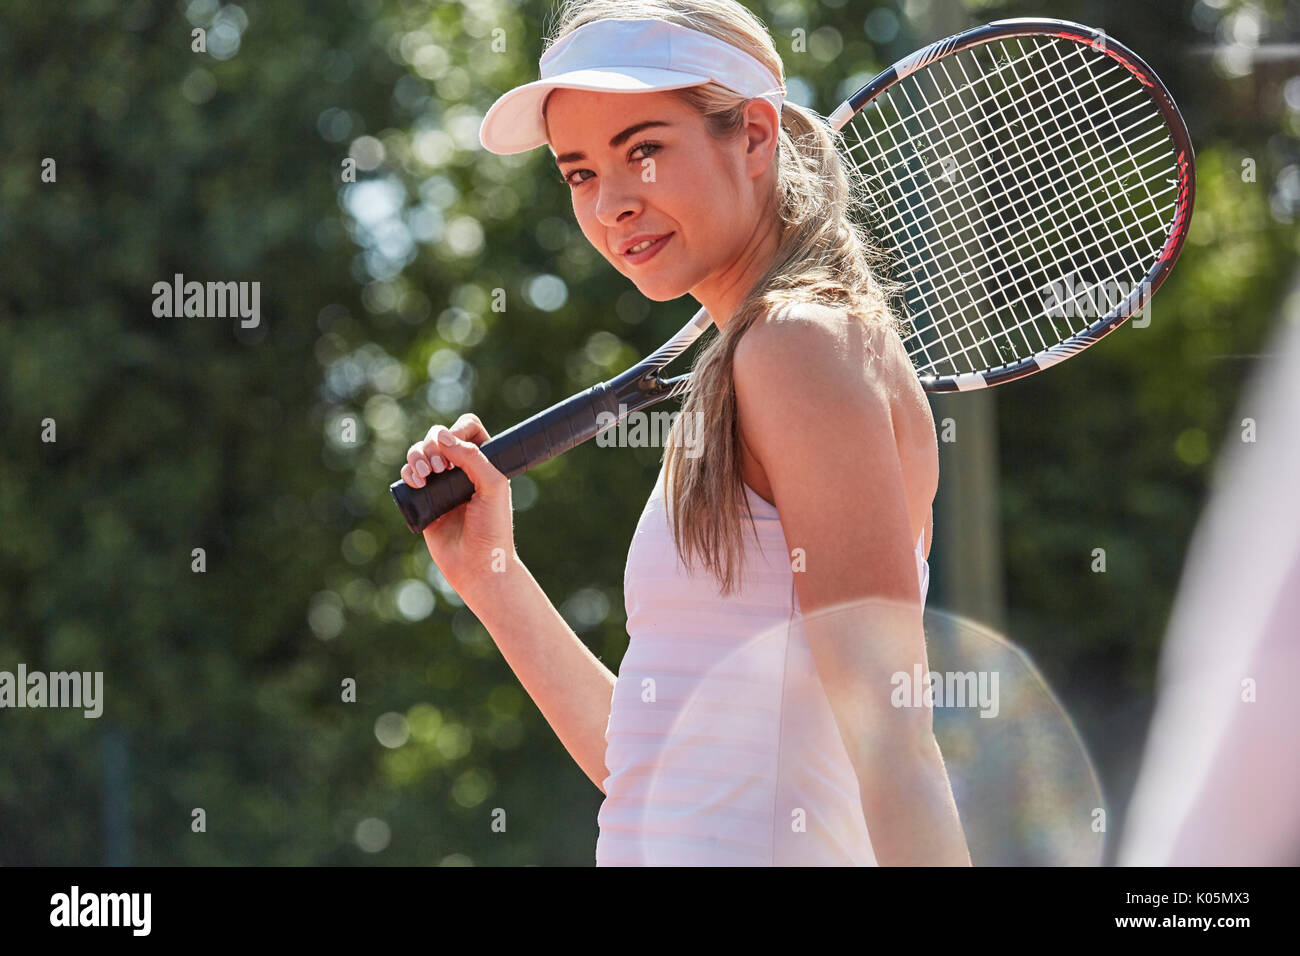 Portrait confident young female tennis player holding tennis racket Stock Photo